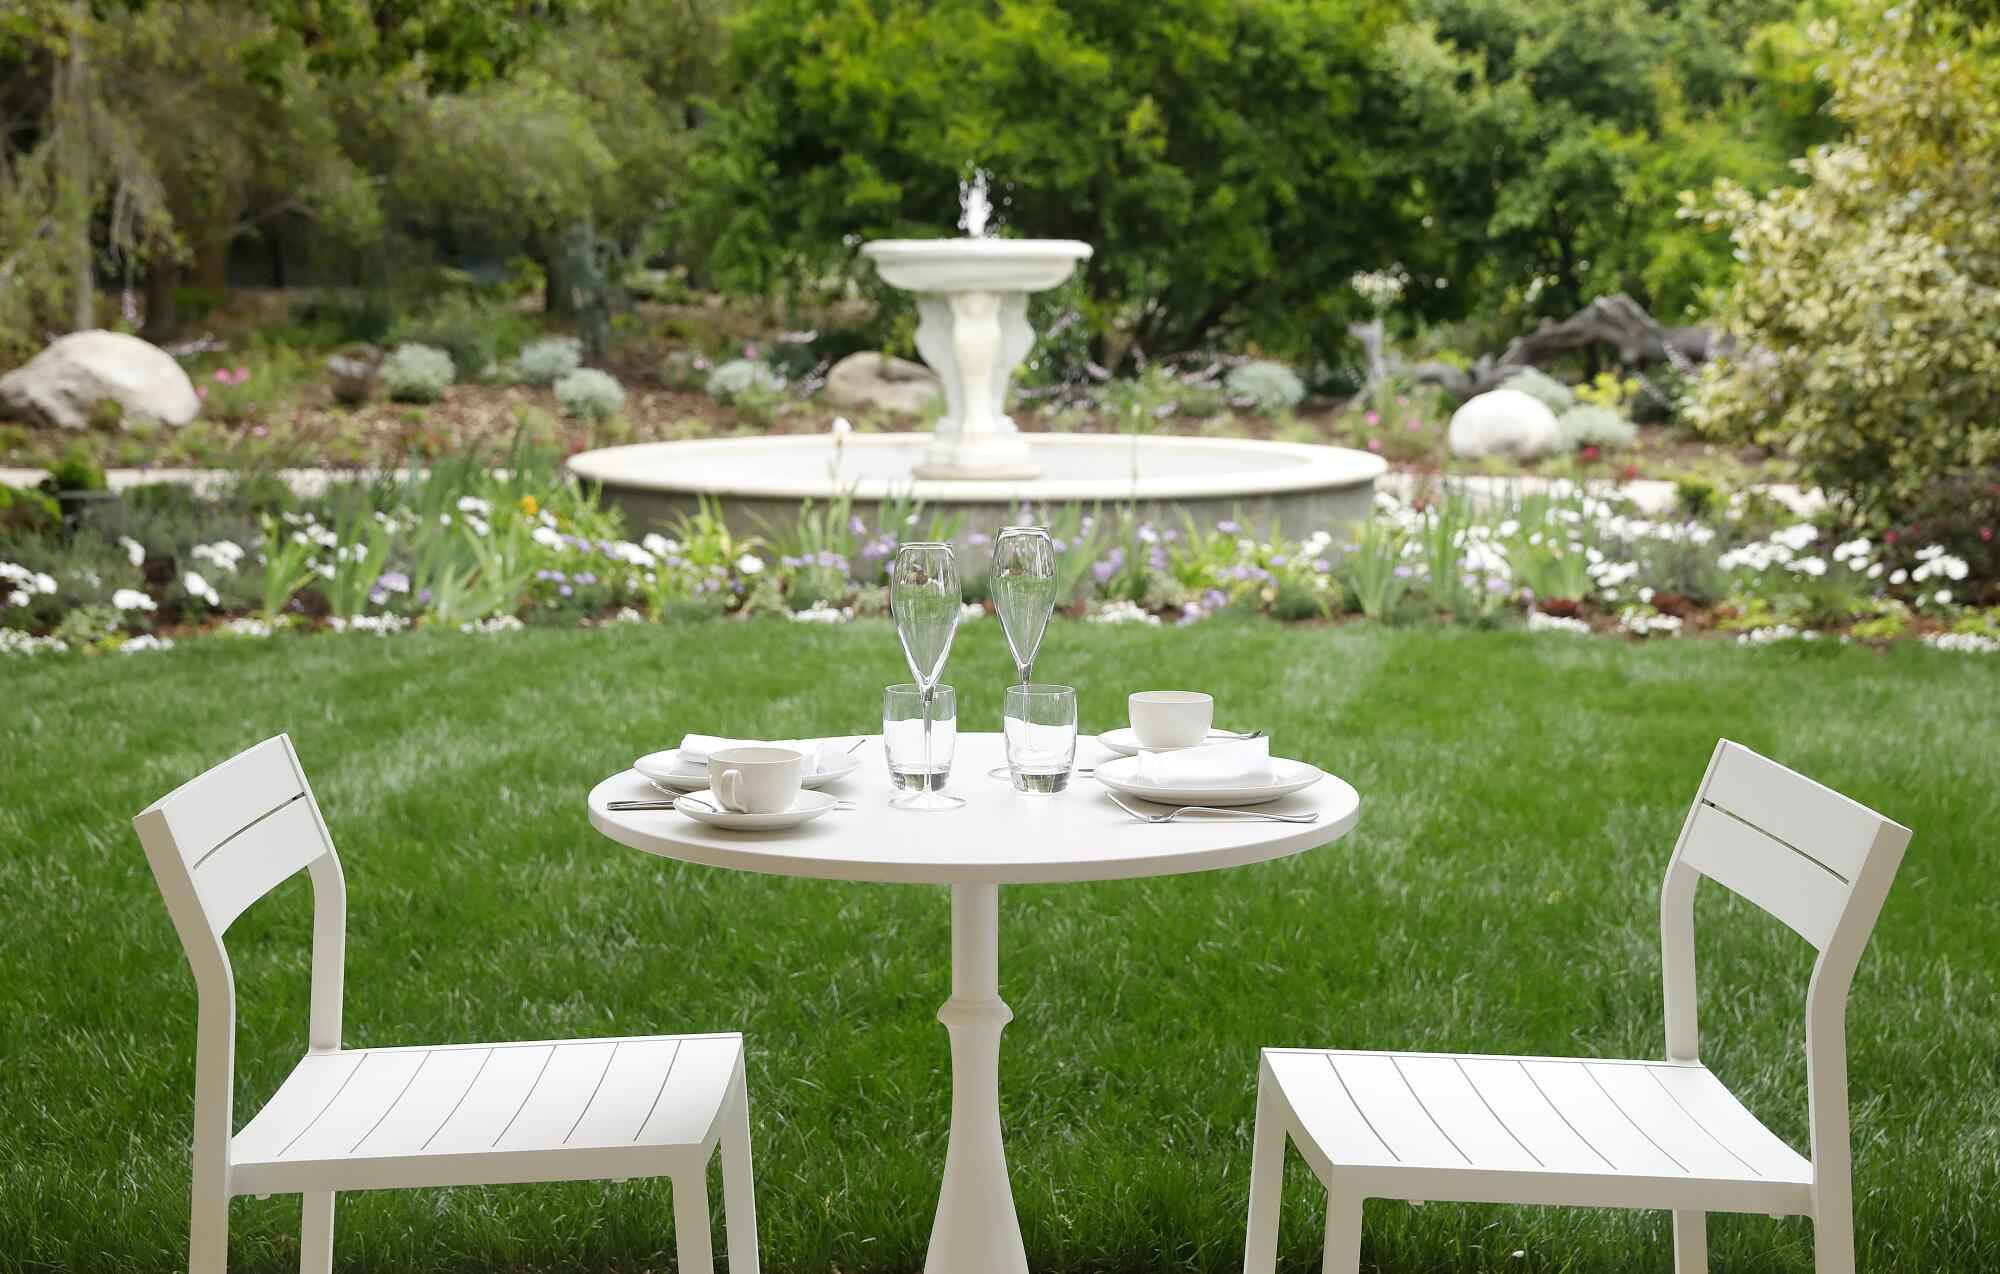 A white table with two chairs, with a garden fountain beyond.